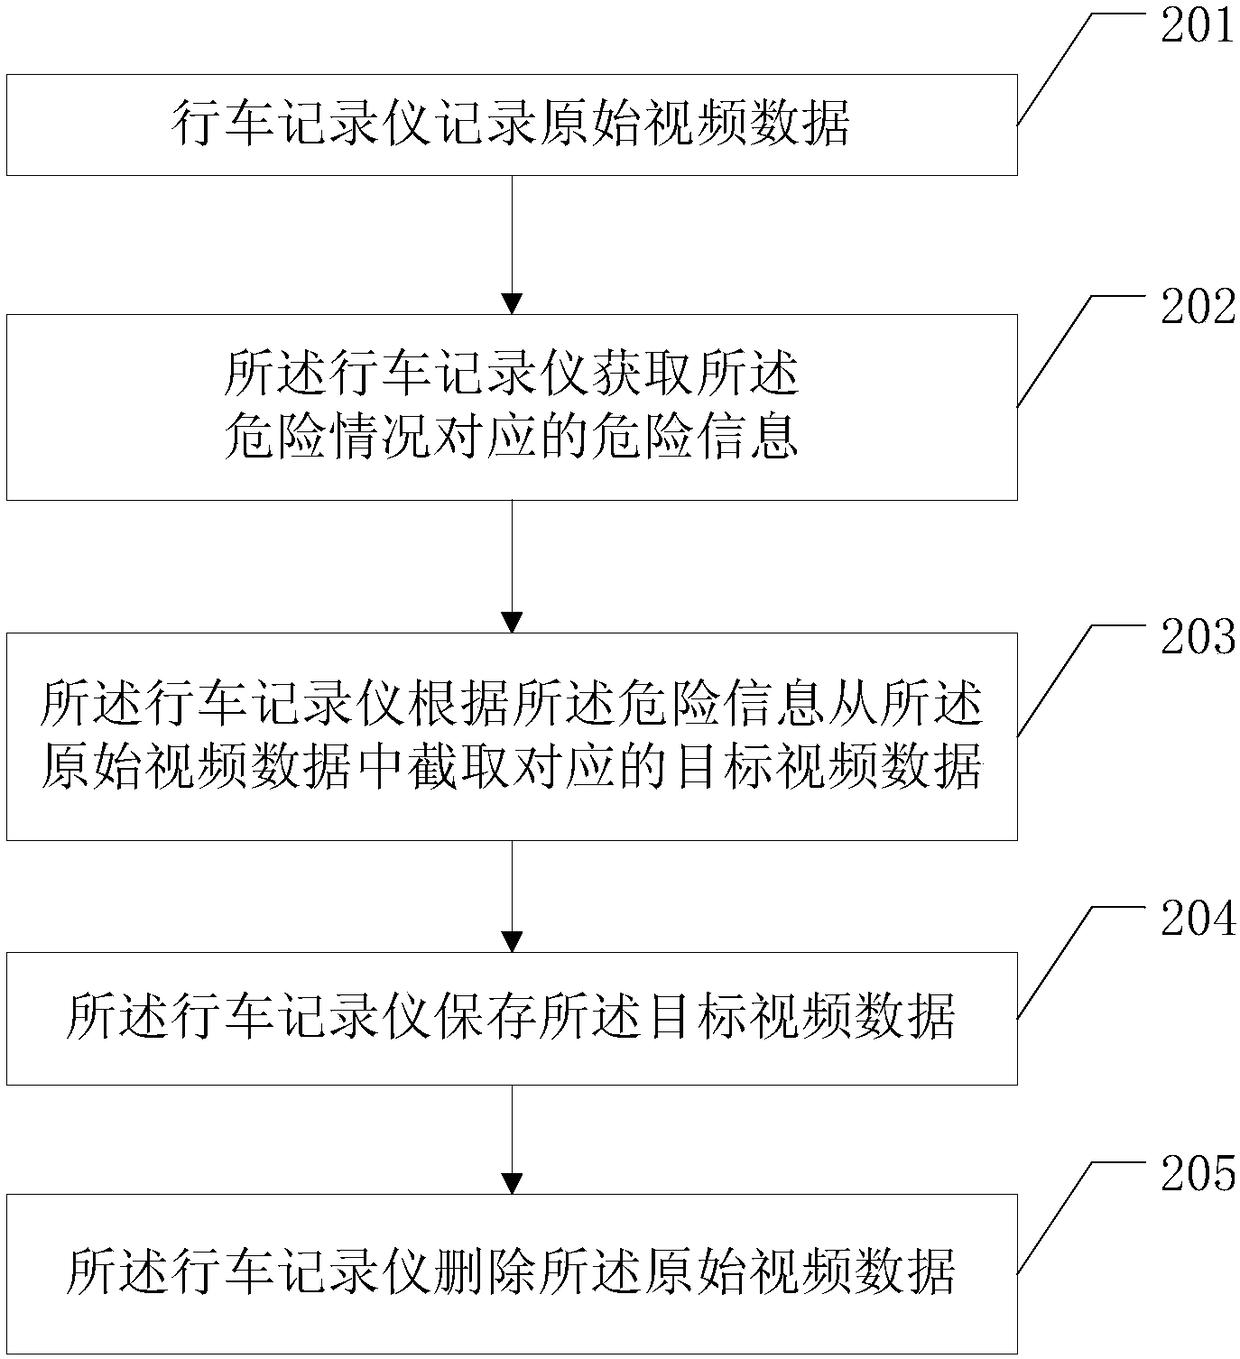 Driving data management method and automobile data recorder